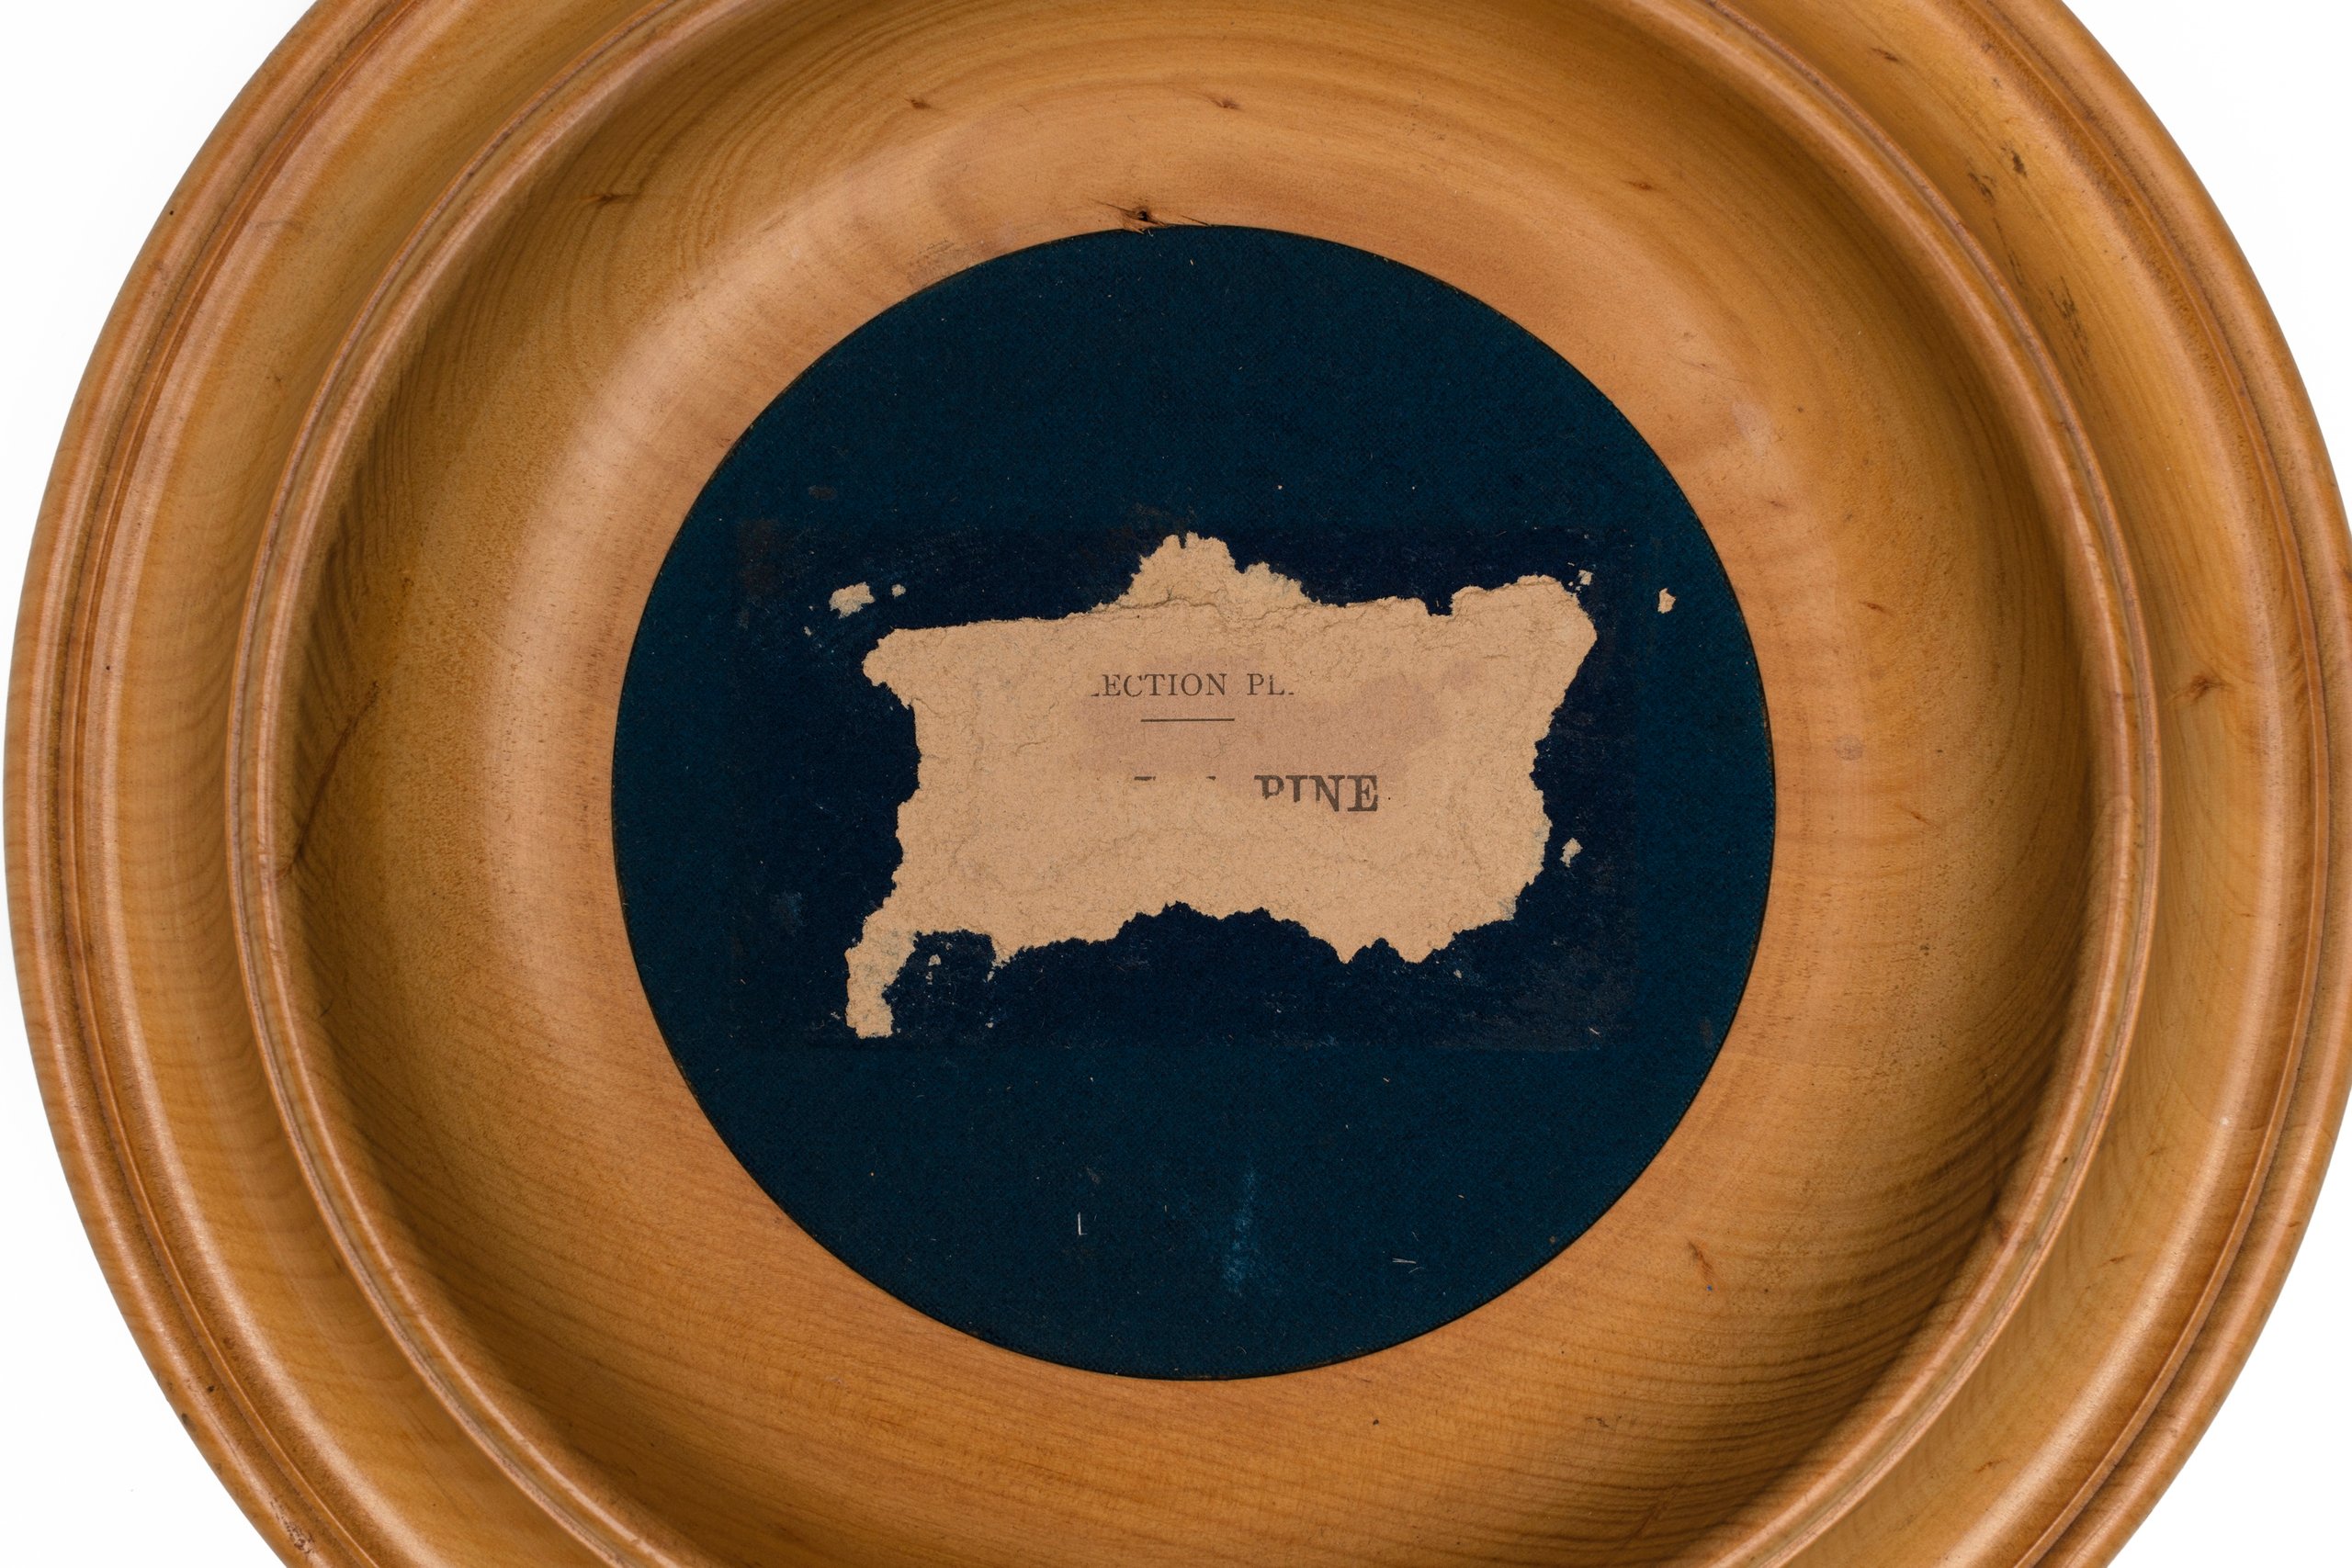 Timber specimen, collection plate made of Colonial Pine (Arancaria Cunninghamii)